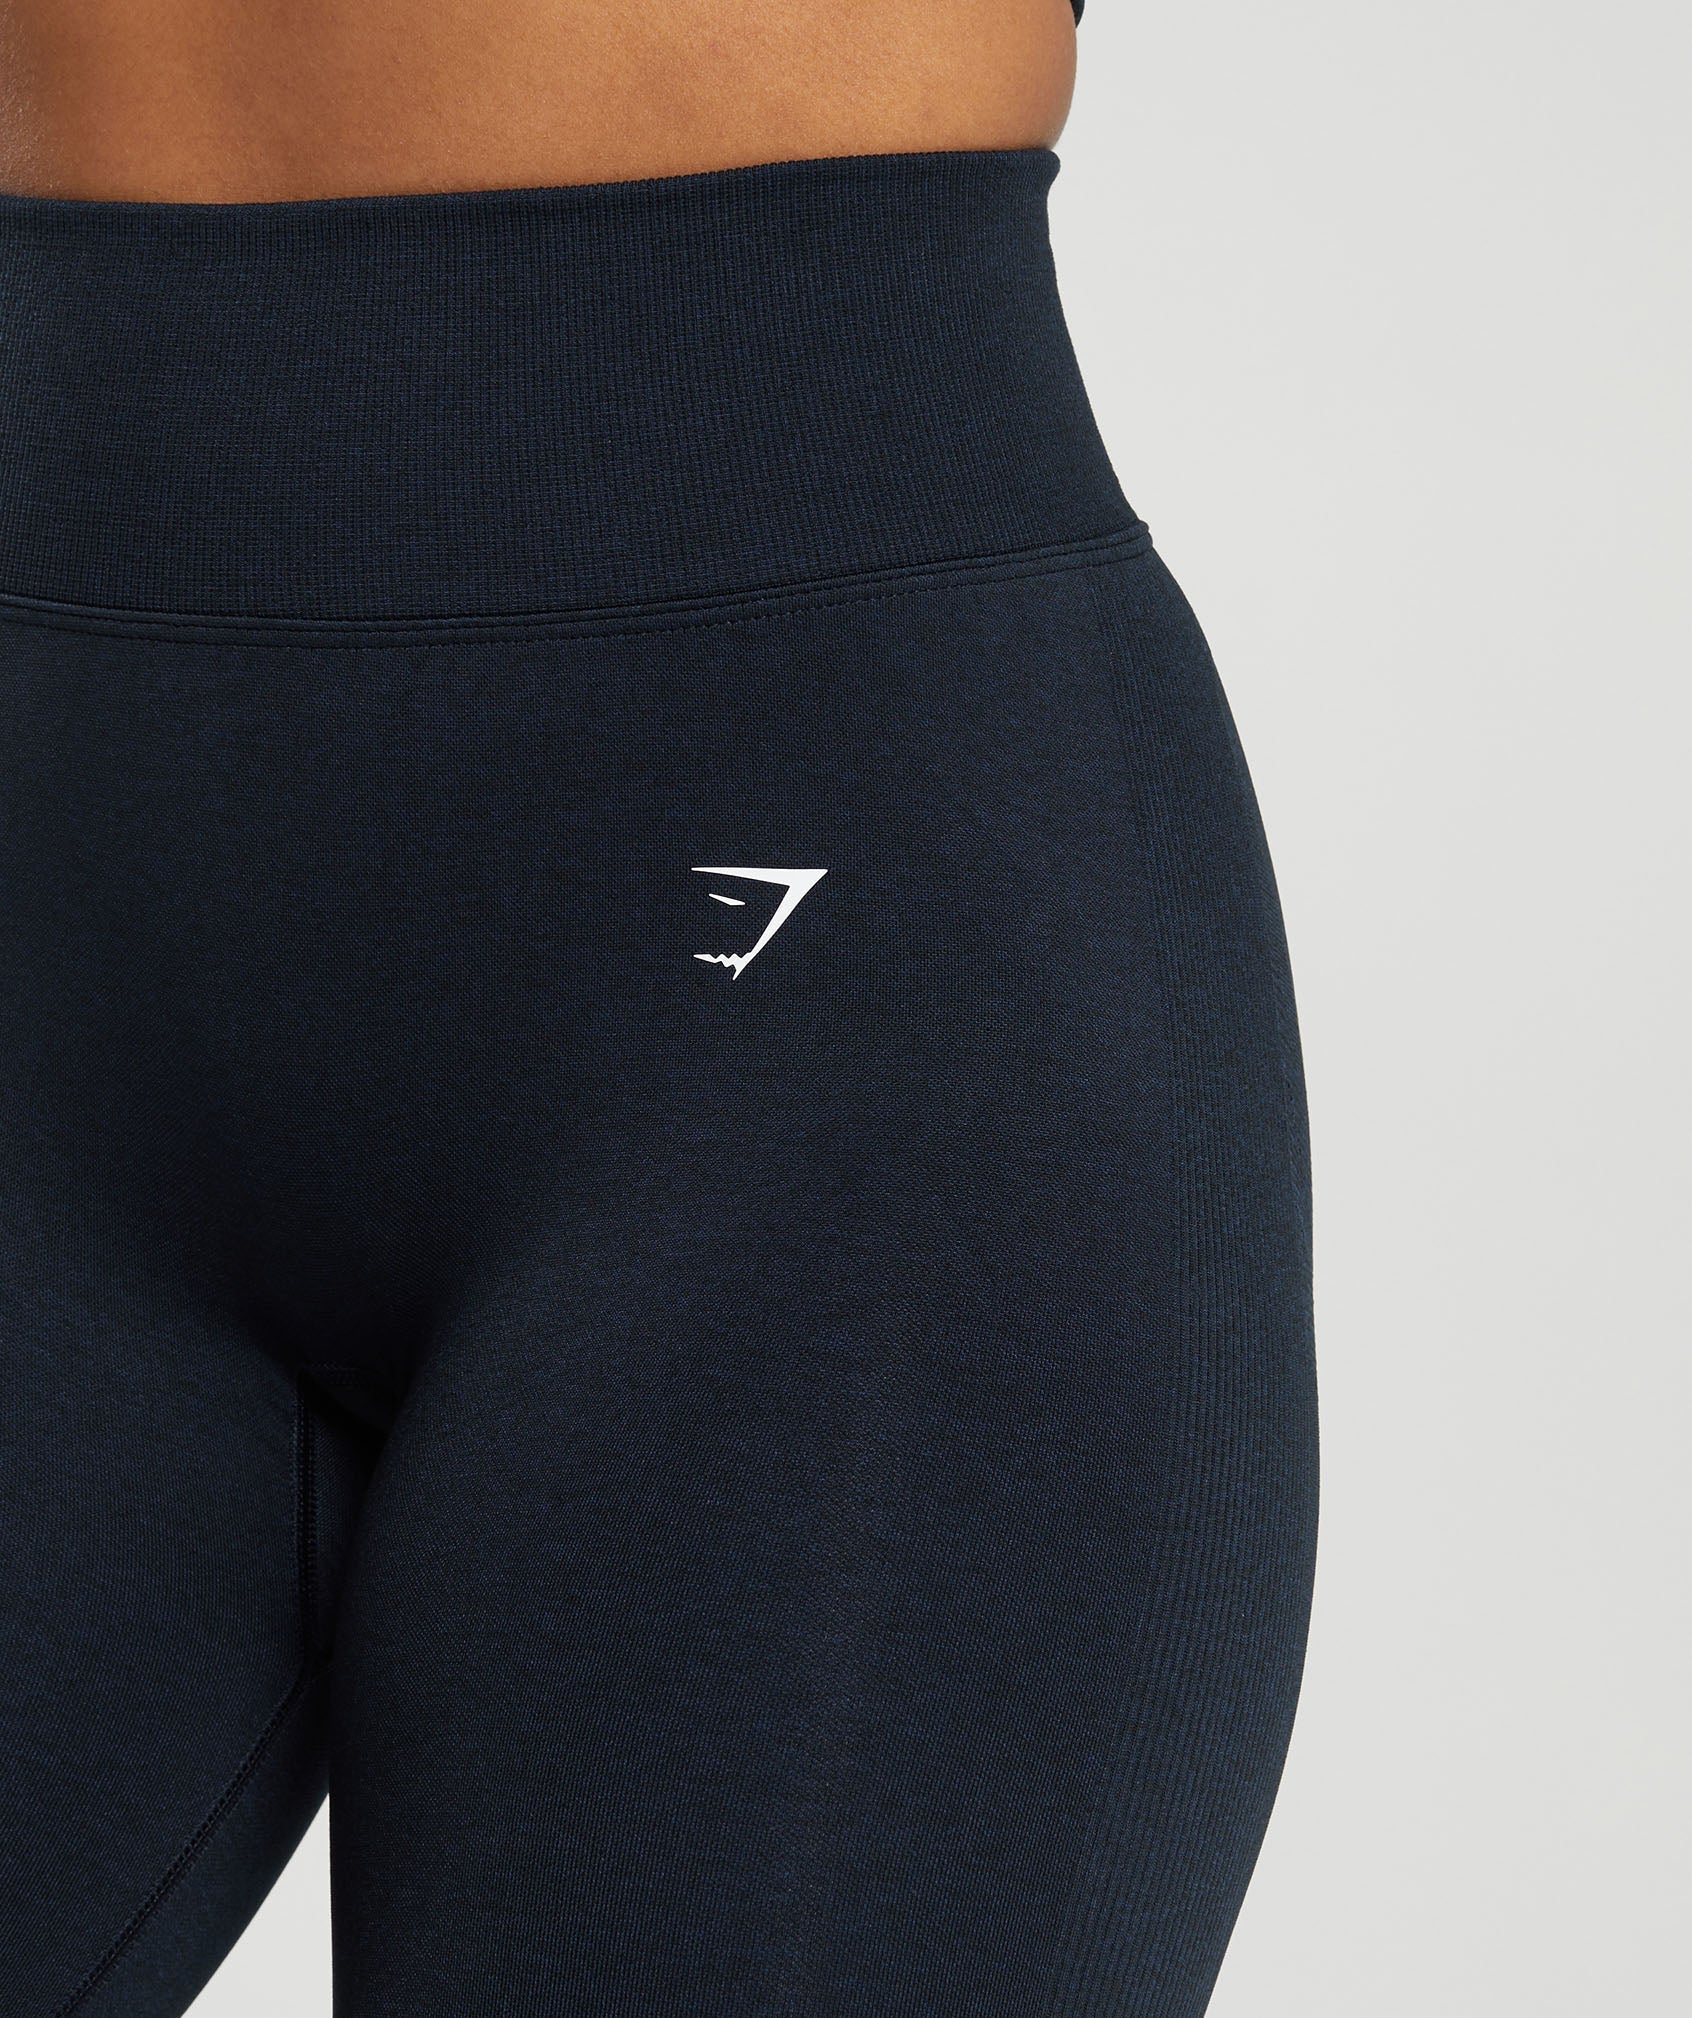 Lift Contour Seamless Leggings in Midnight Blue/Black Marl - view 5